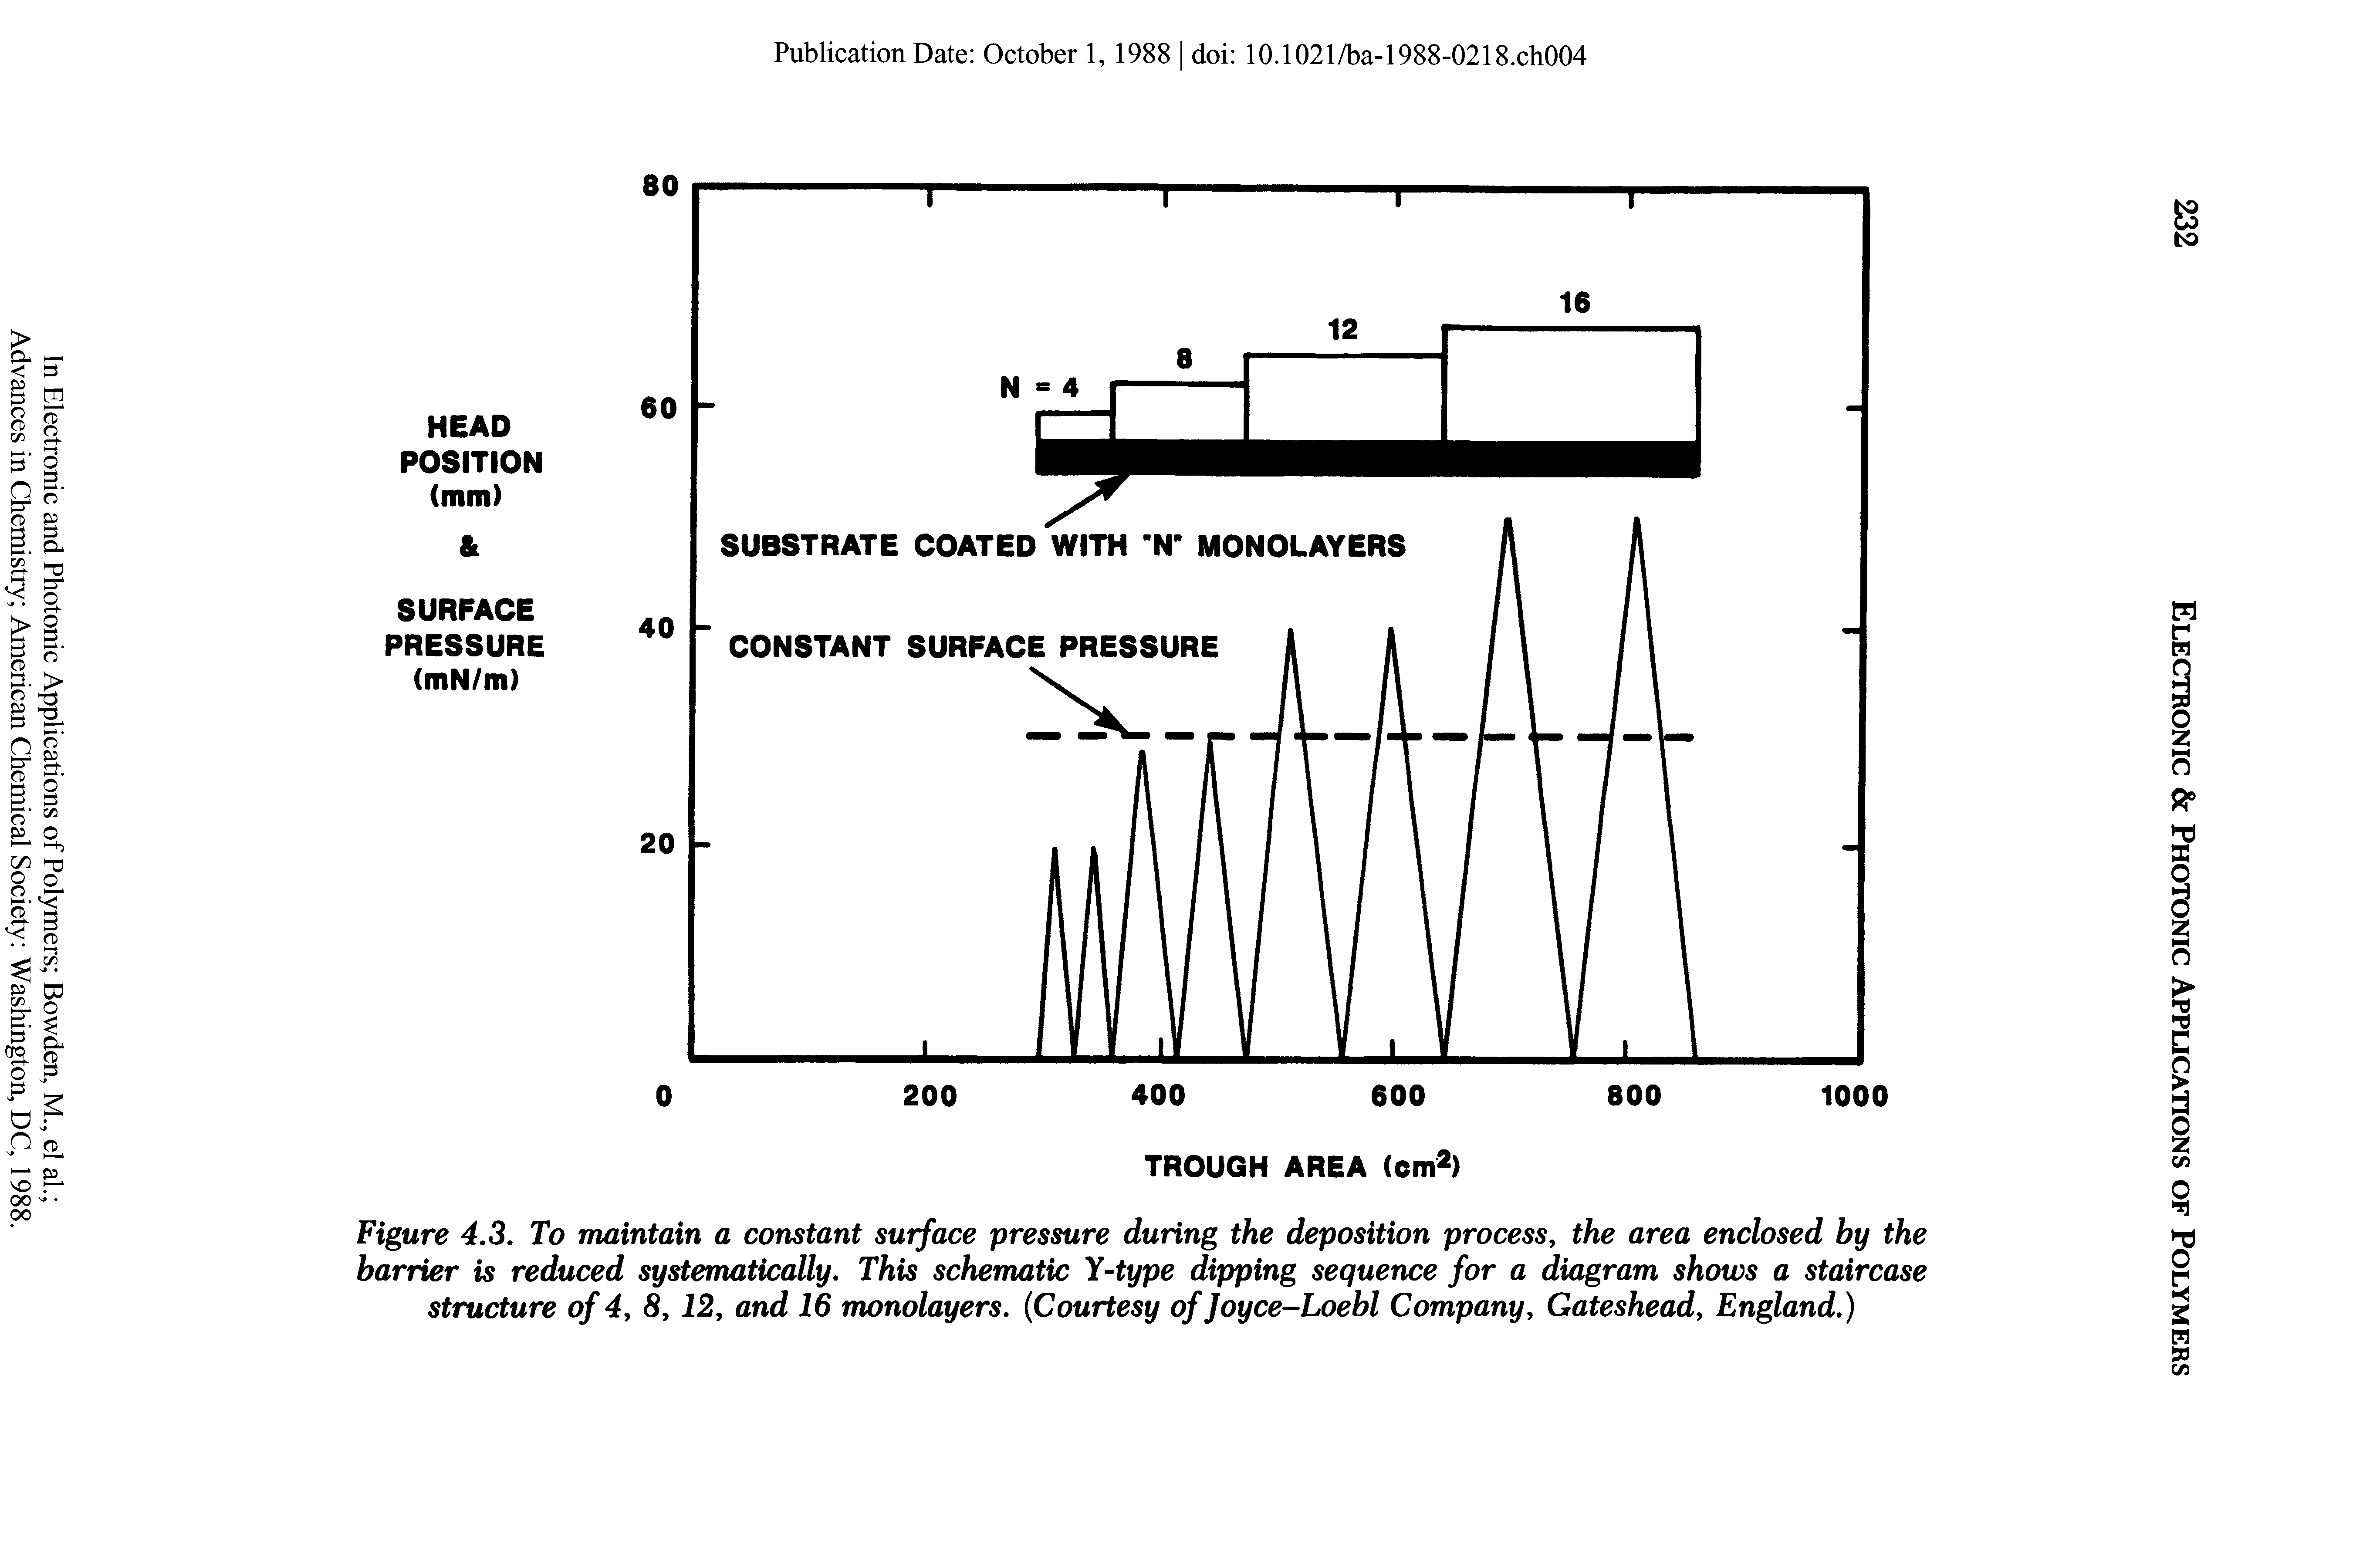 Figure 4.3. To maintain a constant surface pressure during the deposition process, the area enclosed by the barrier is reduced systematically. This schematic Y-type dipping sequence for a diagram shows a staircase structure of 4, 8, 12, and 16 monolayers. Courtesy of Joyce-Loebl Company, Gateshead, England.)...